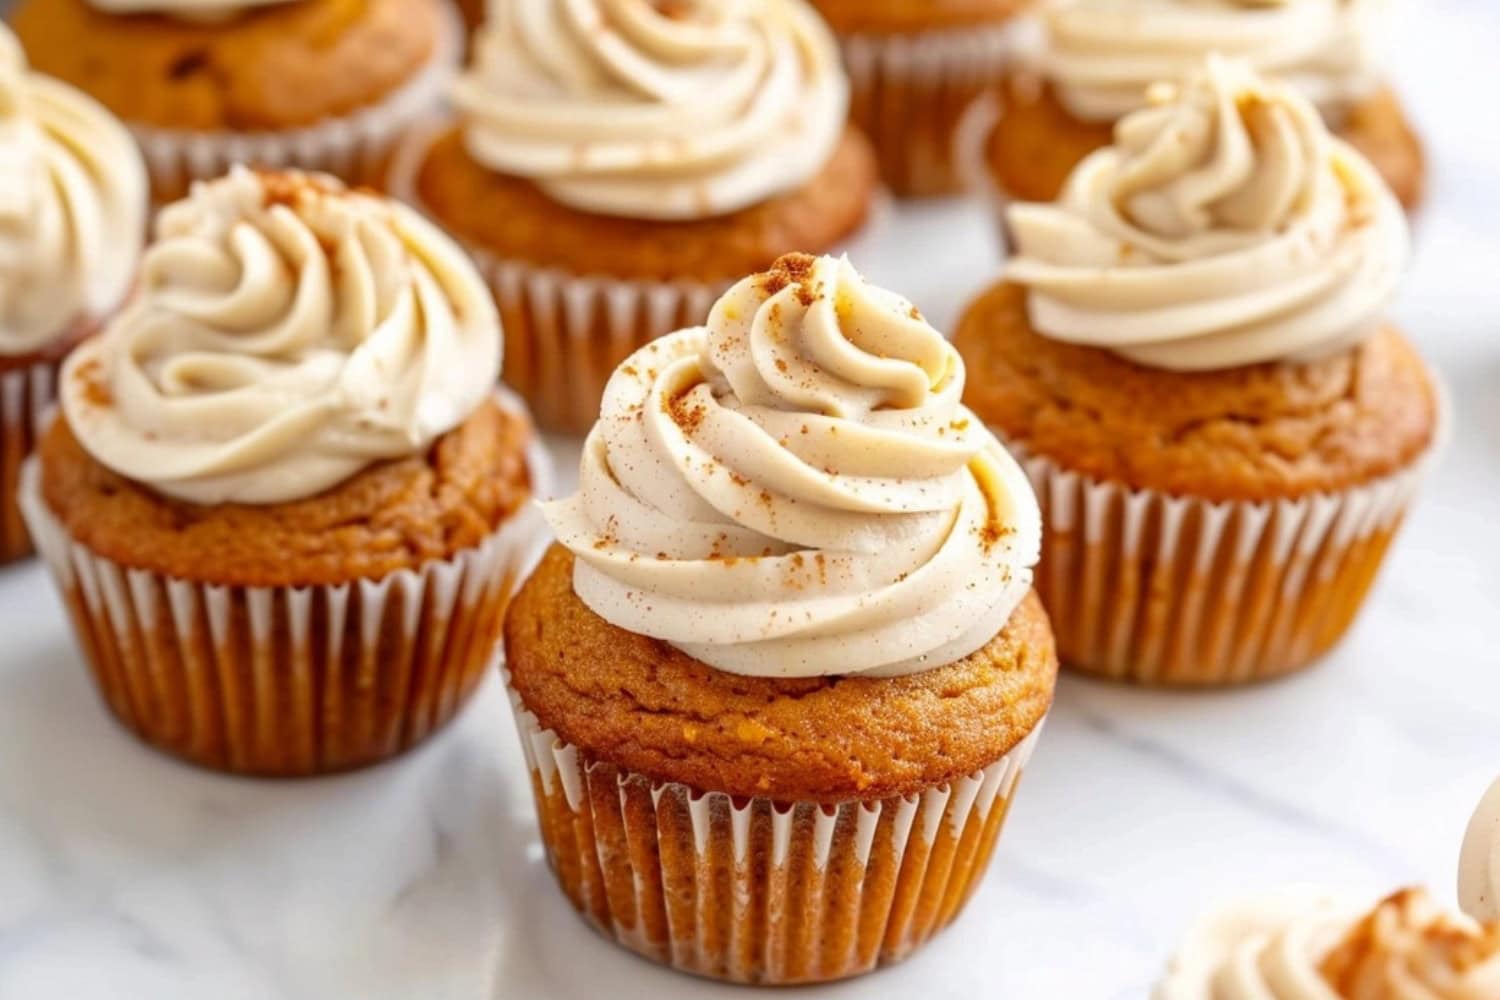 Pumpkin cupcakes with cream cheese frosting arranged in a white marble table.